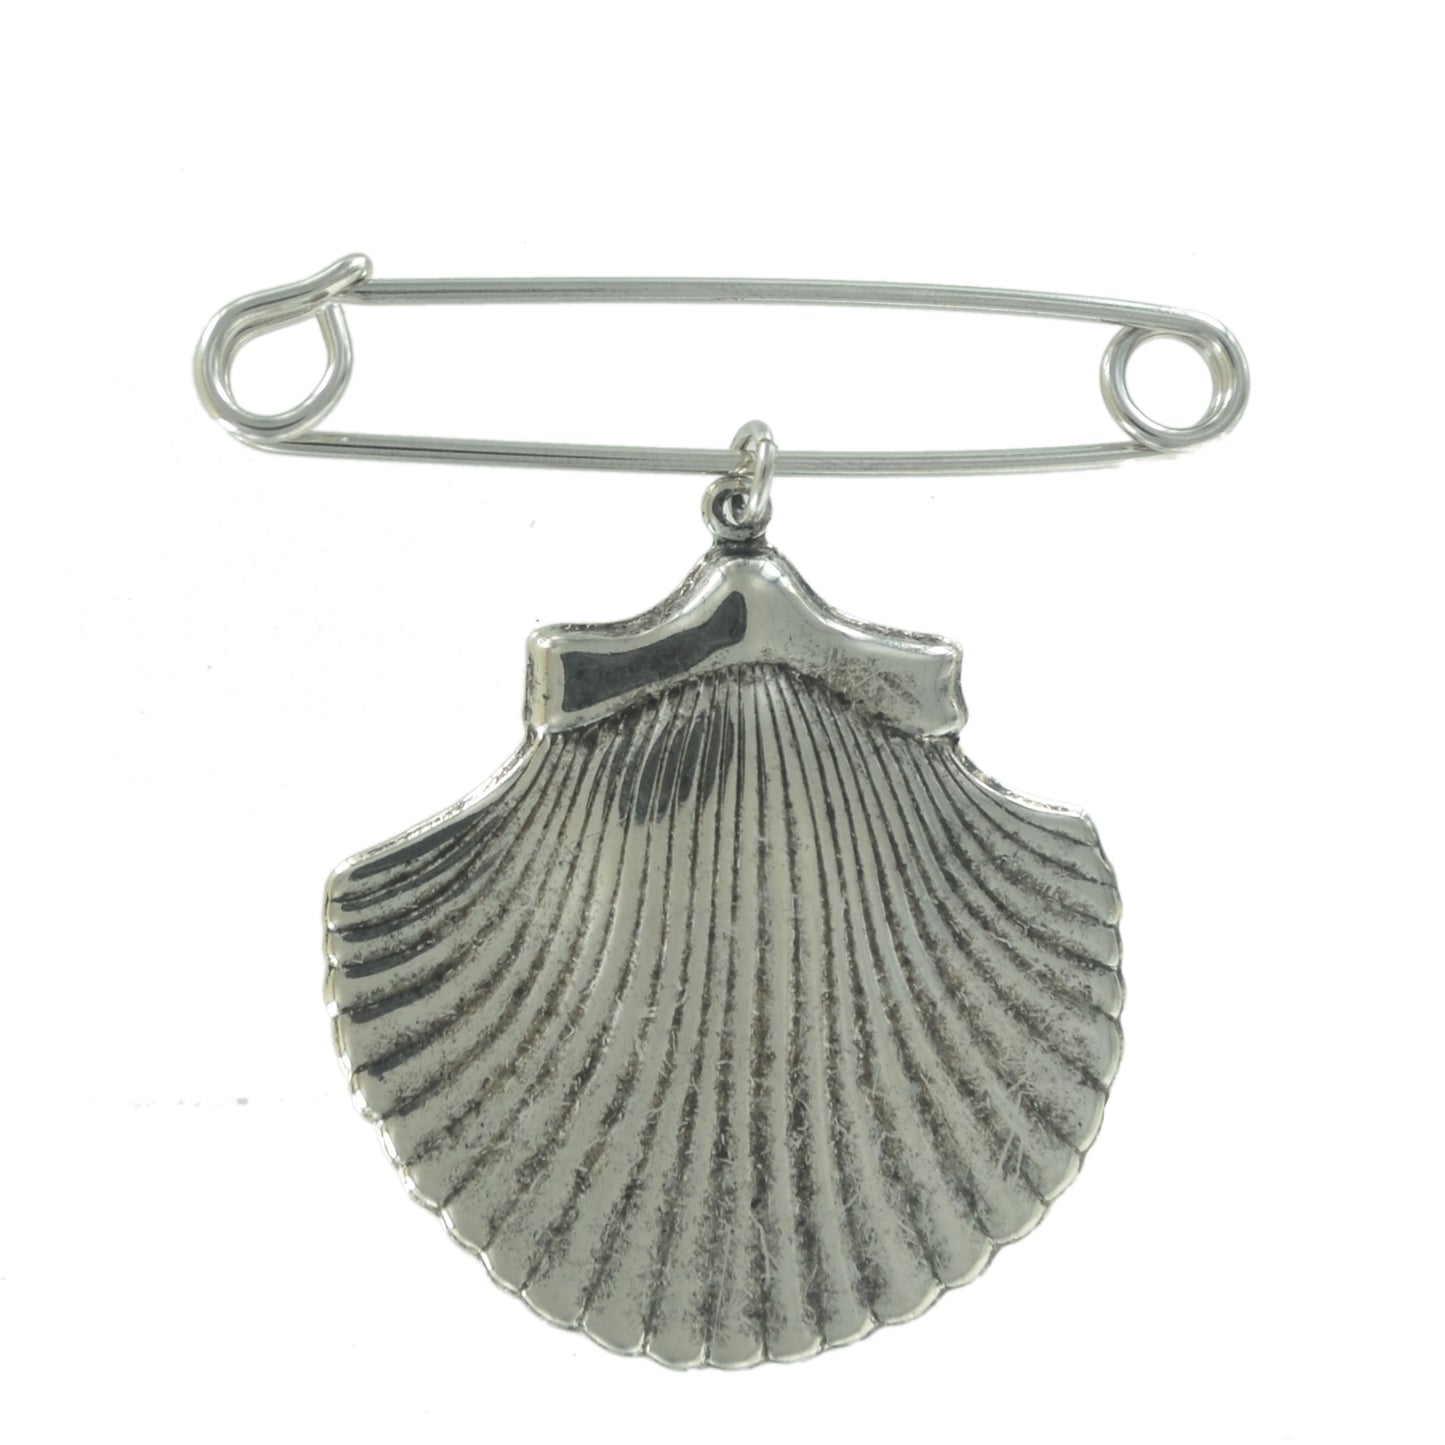 Ky & Co Made in USA Safety Pin Brooch Cockle Sea Shell Charm Silver Tone